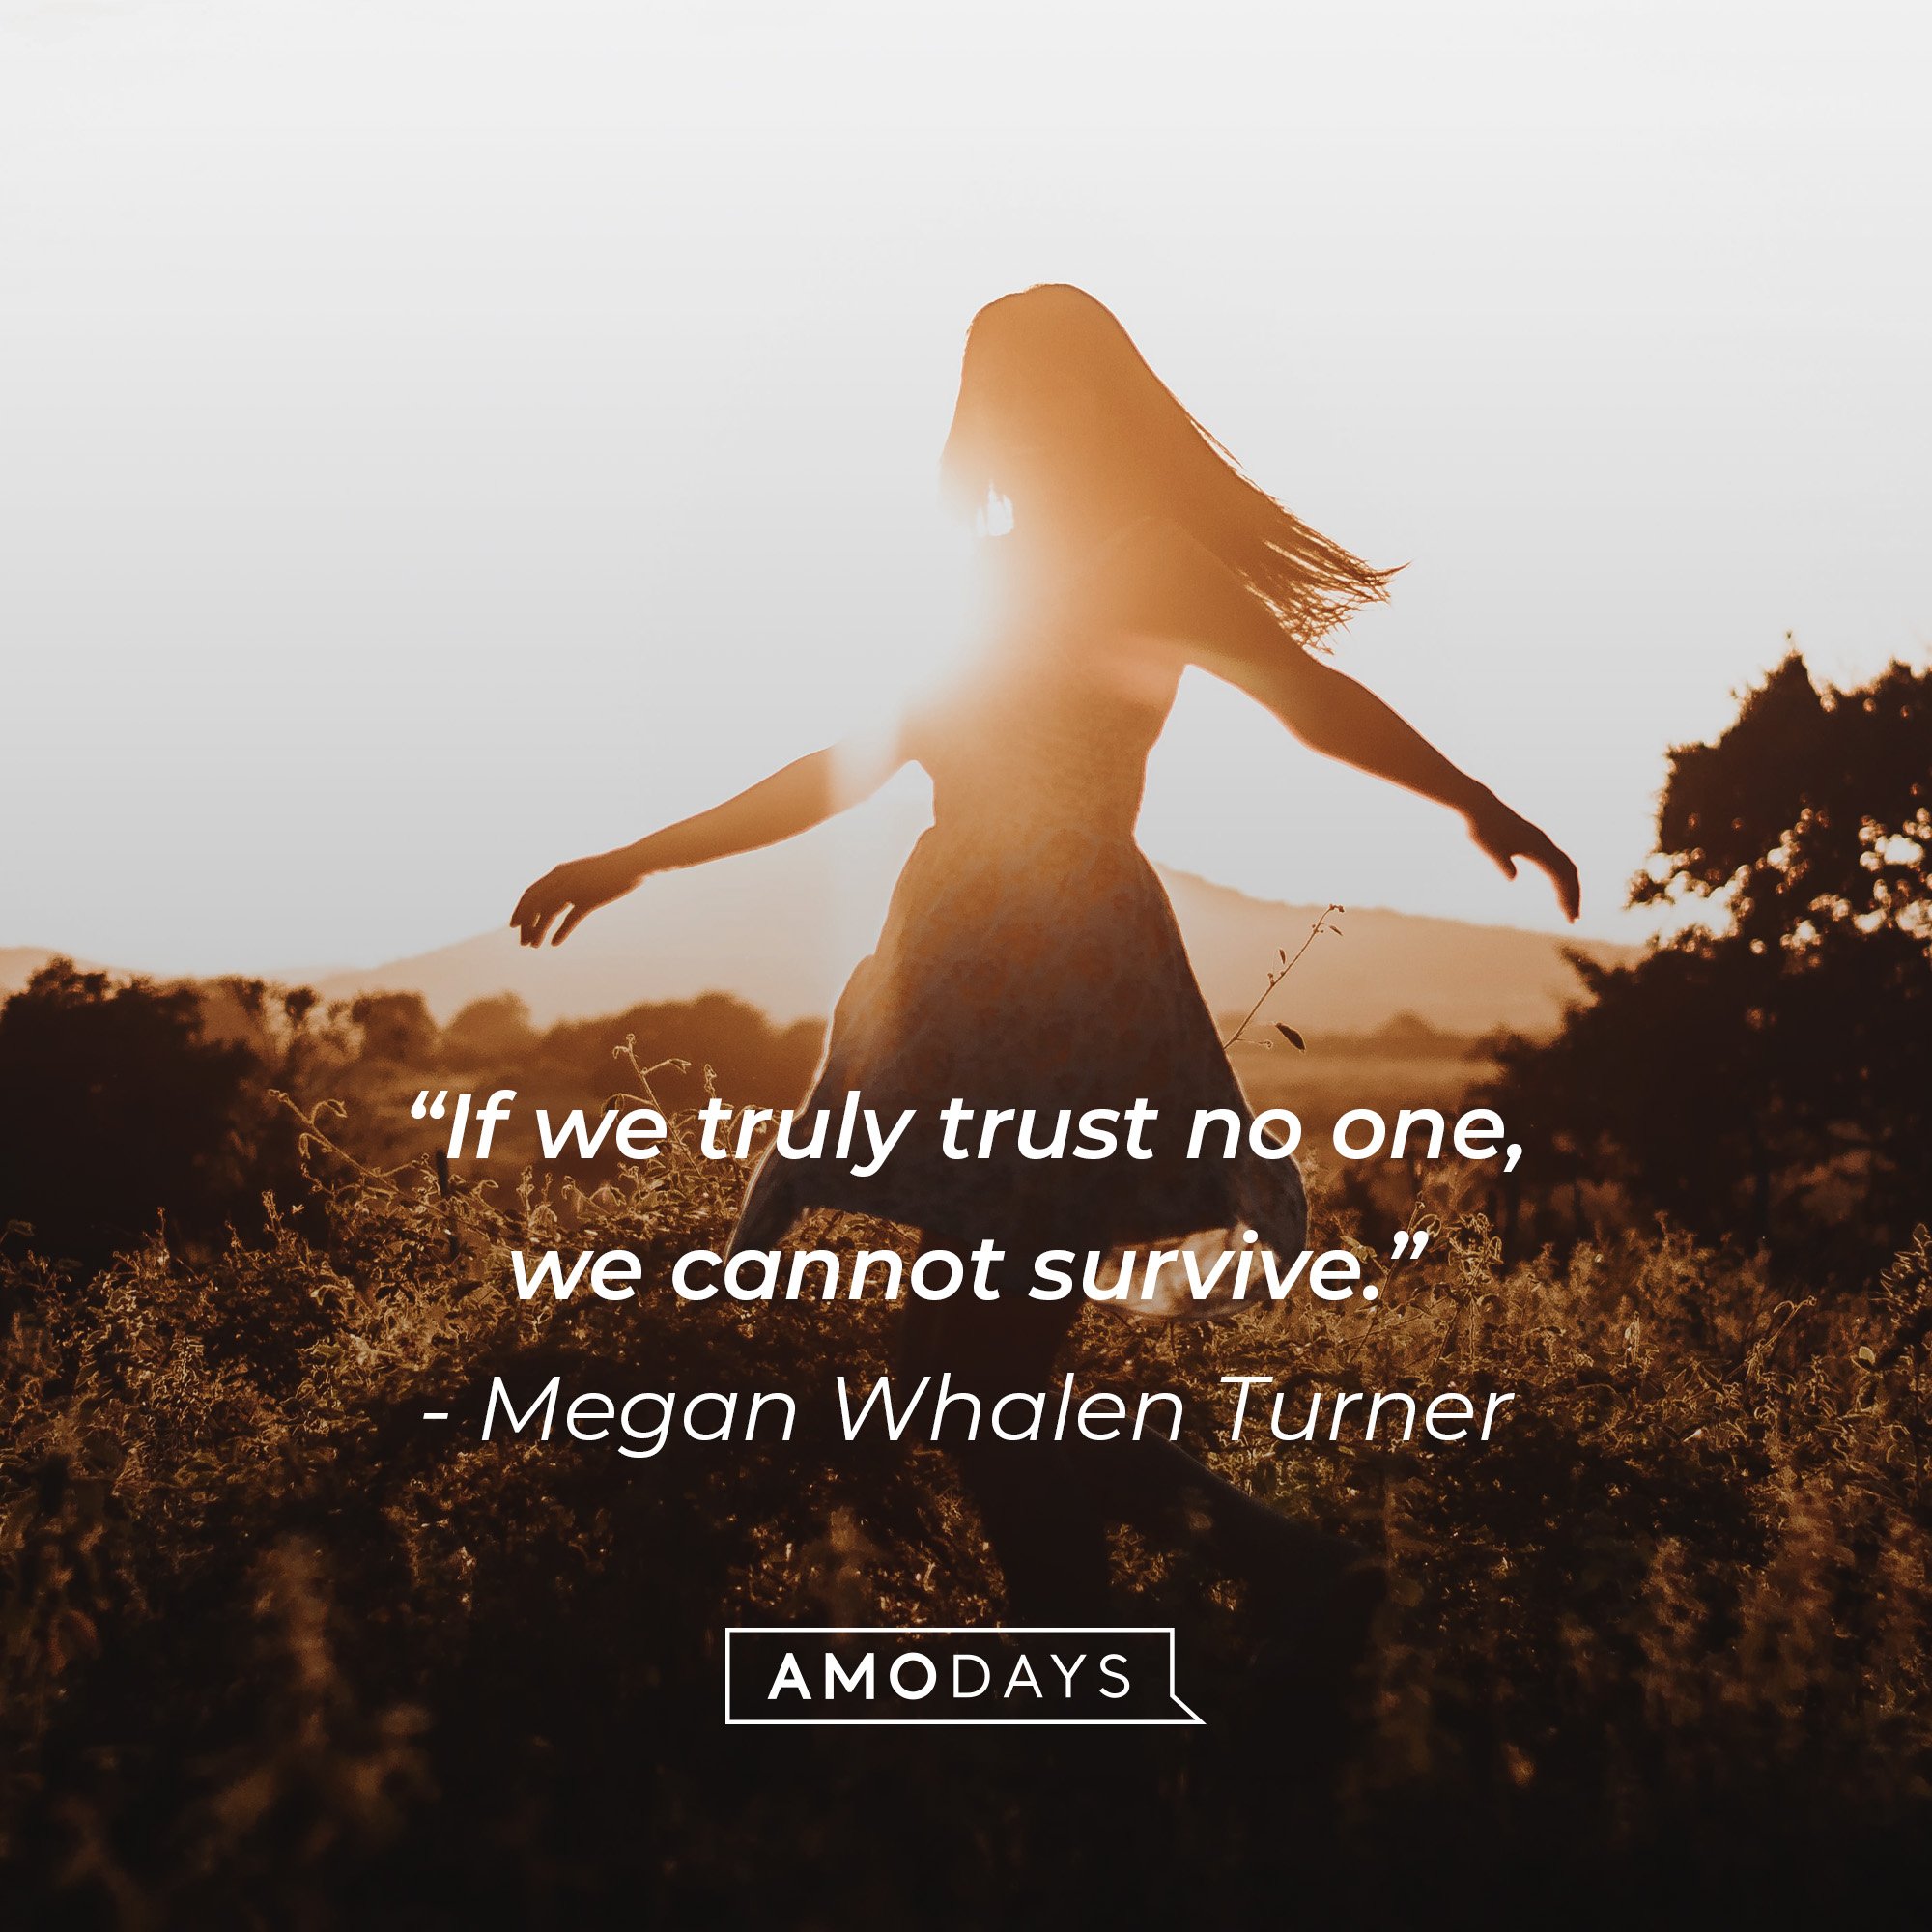 Megan Whalen Turner’s quote: “If we truly trust no one, we cannot survive.” | Image: AmoDays